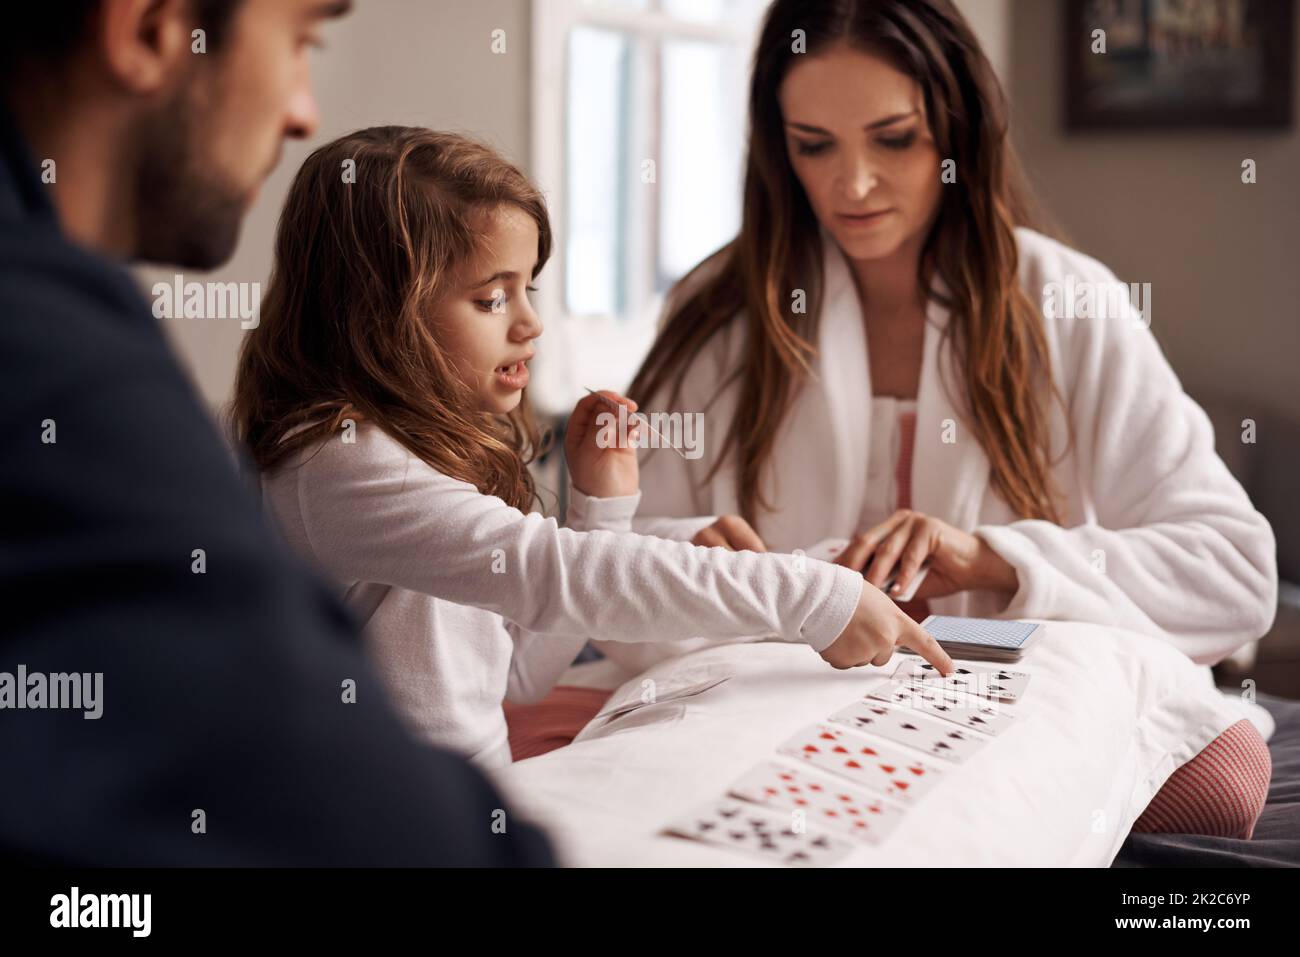 Having fun with mom and dad. Shot of a young family playing cards together at home. Stock Photo